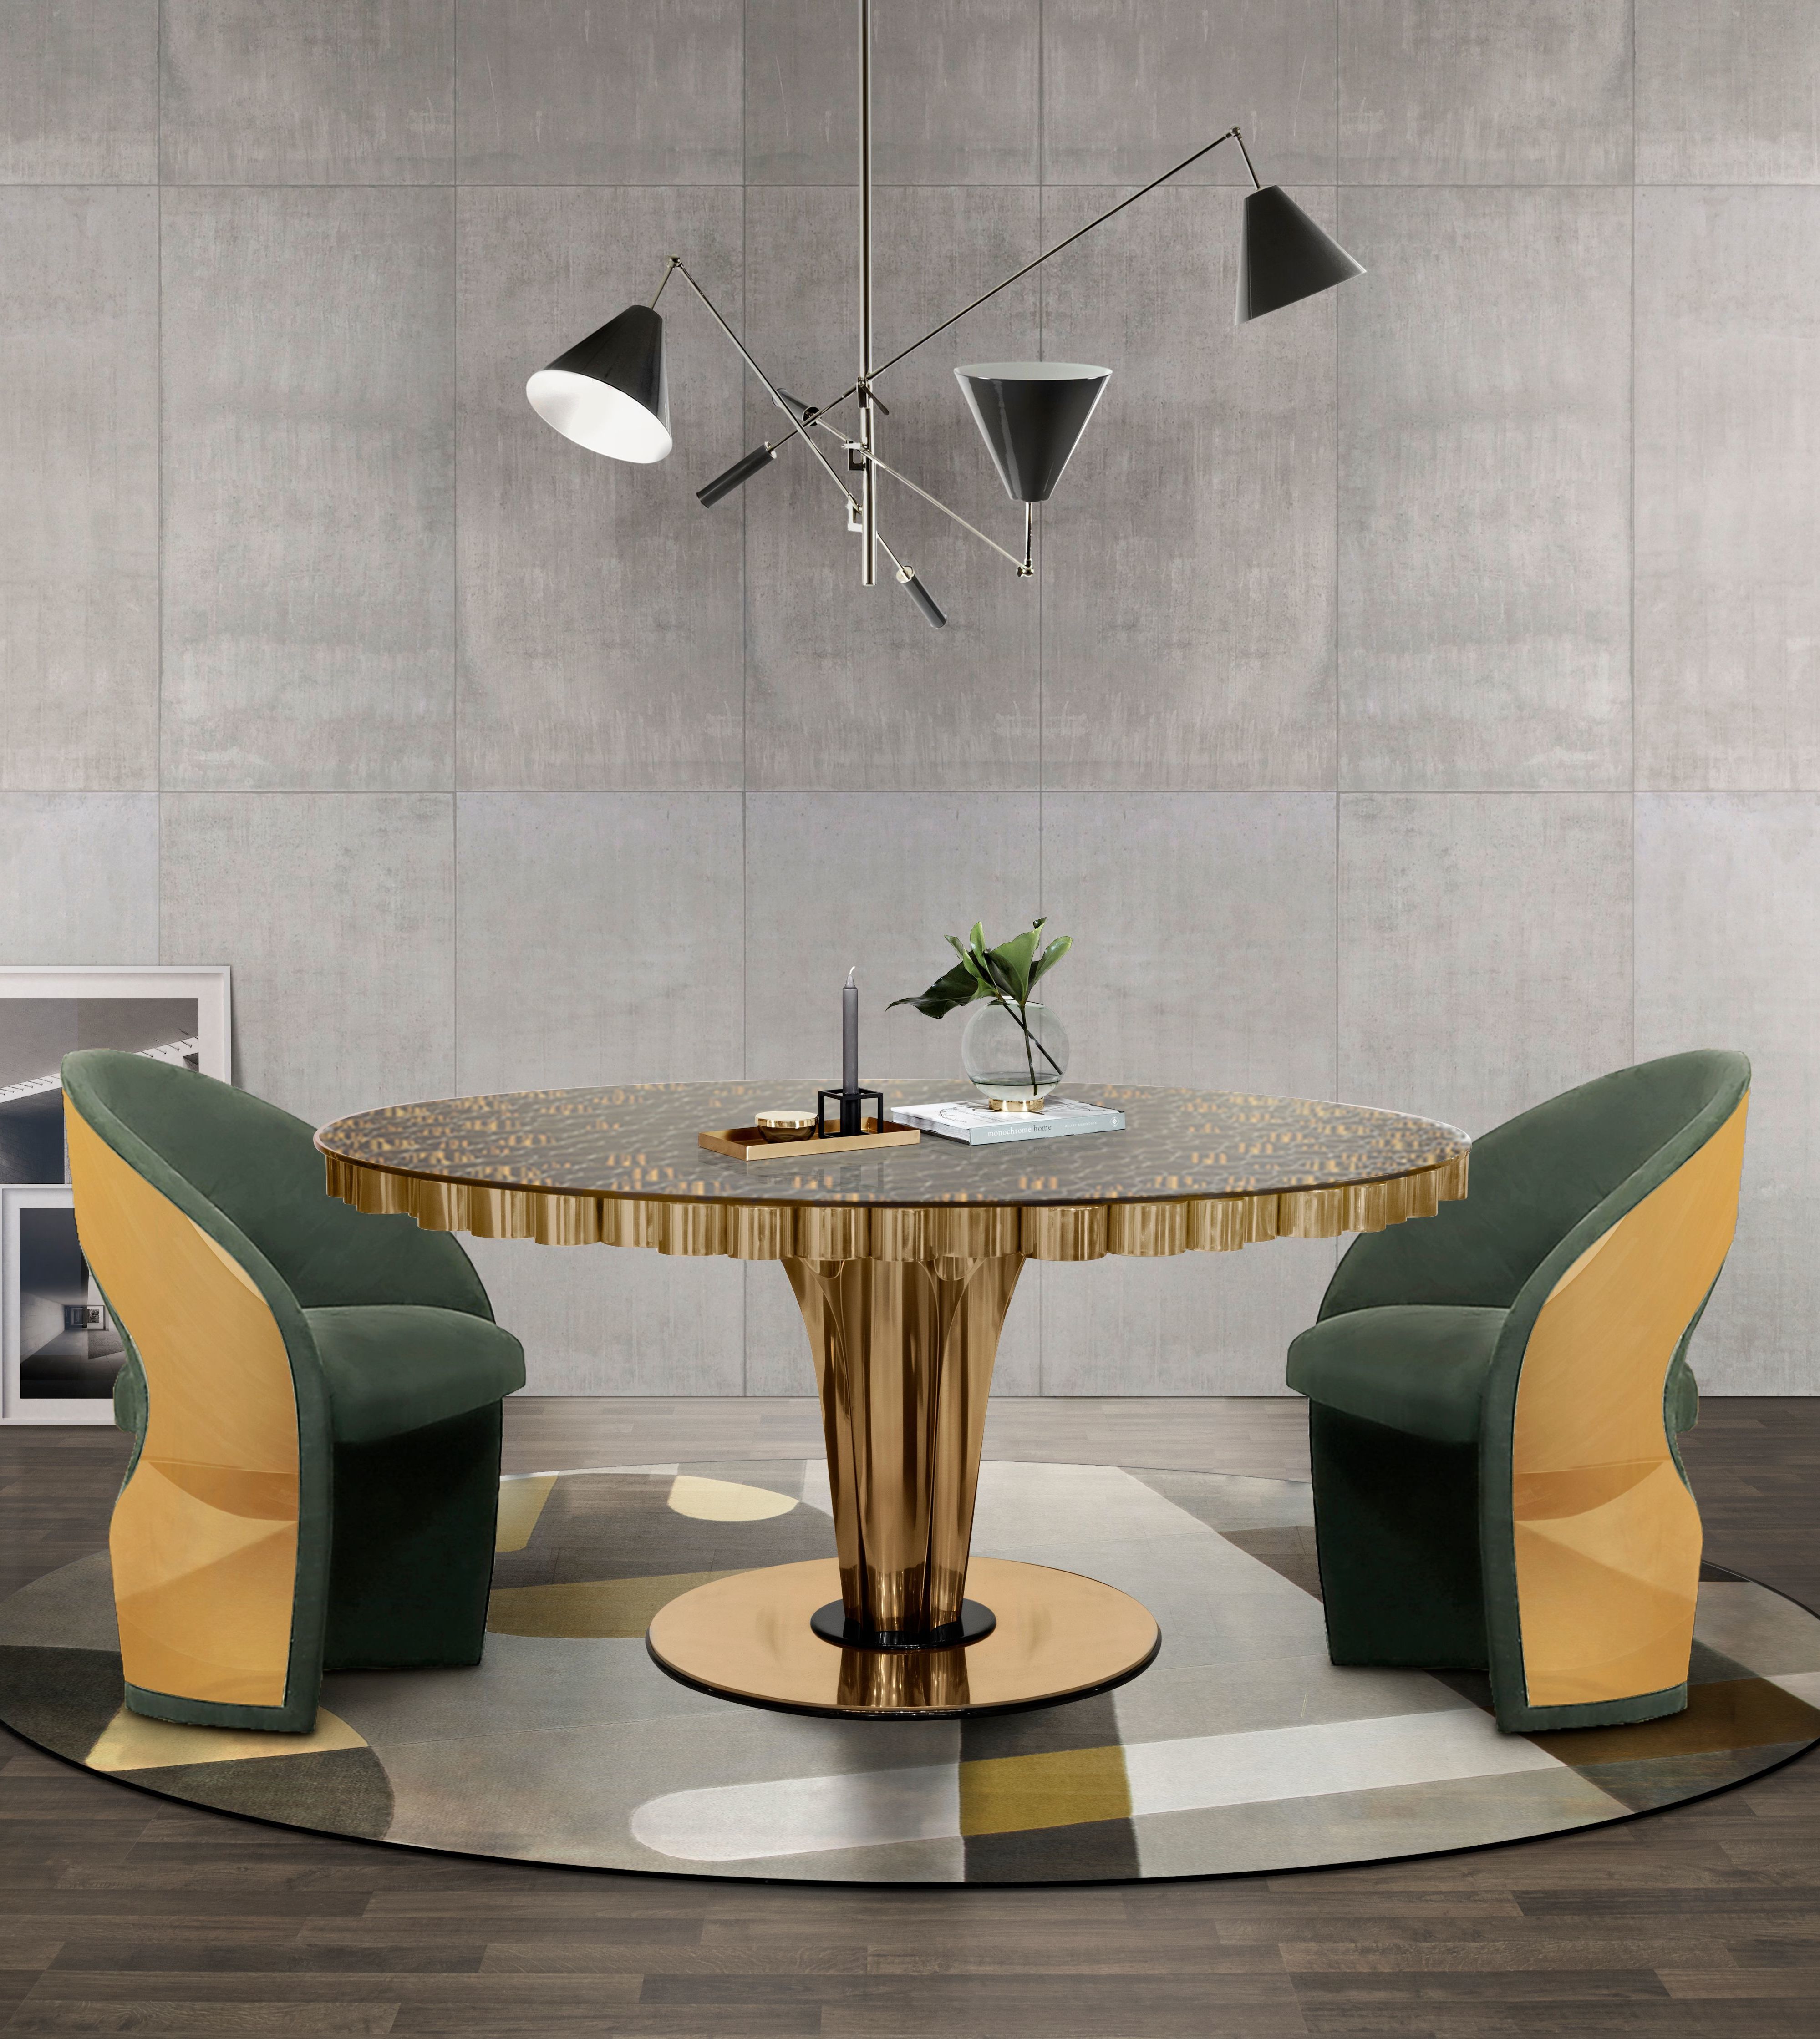 Dining Room With The Curved Shapes Trend by Rug'Society